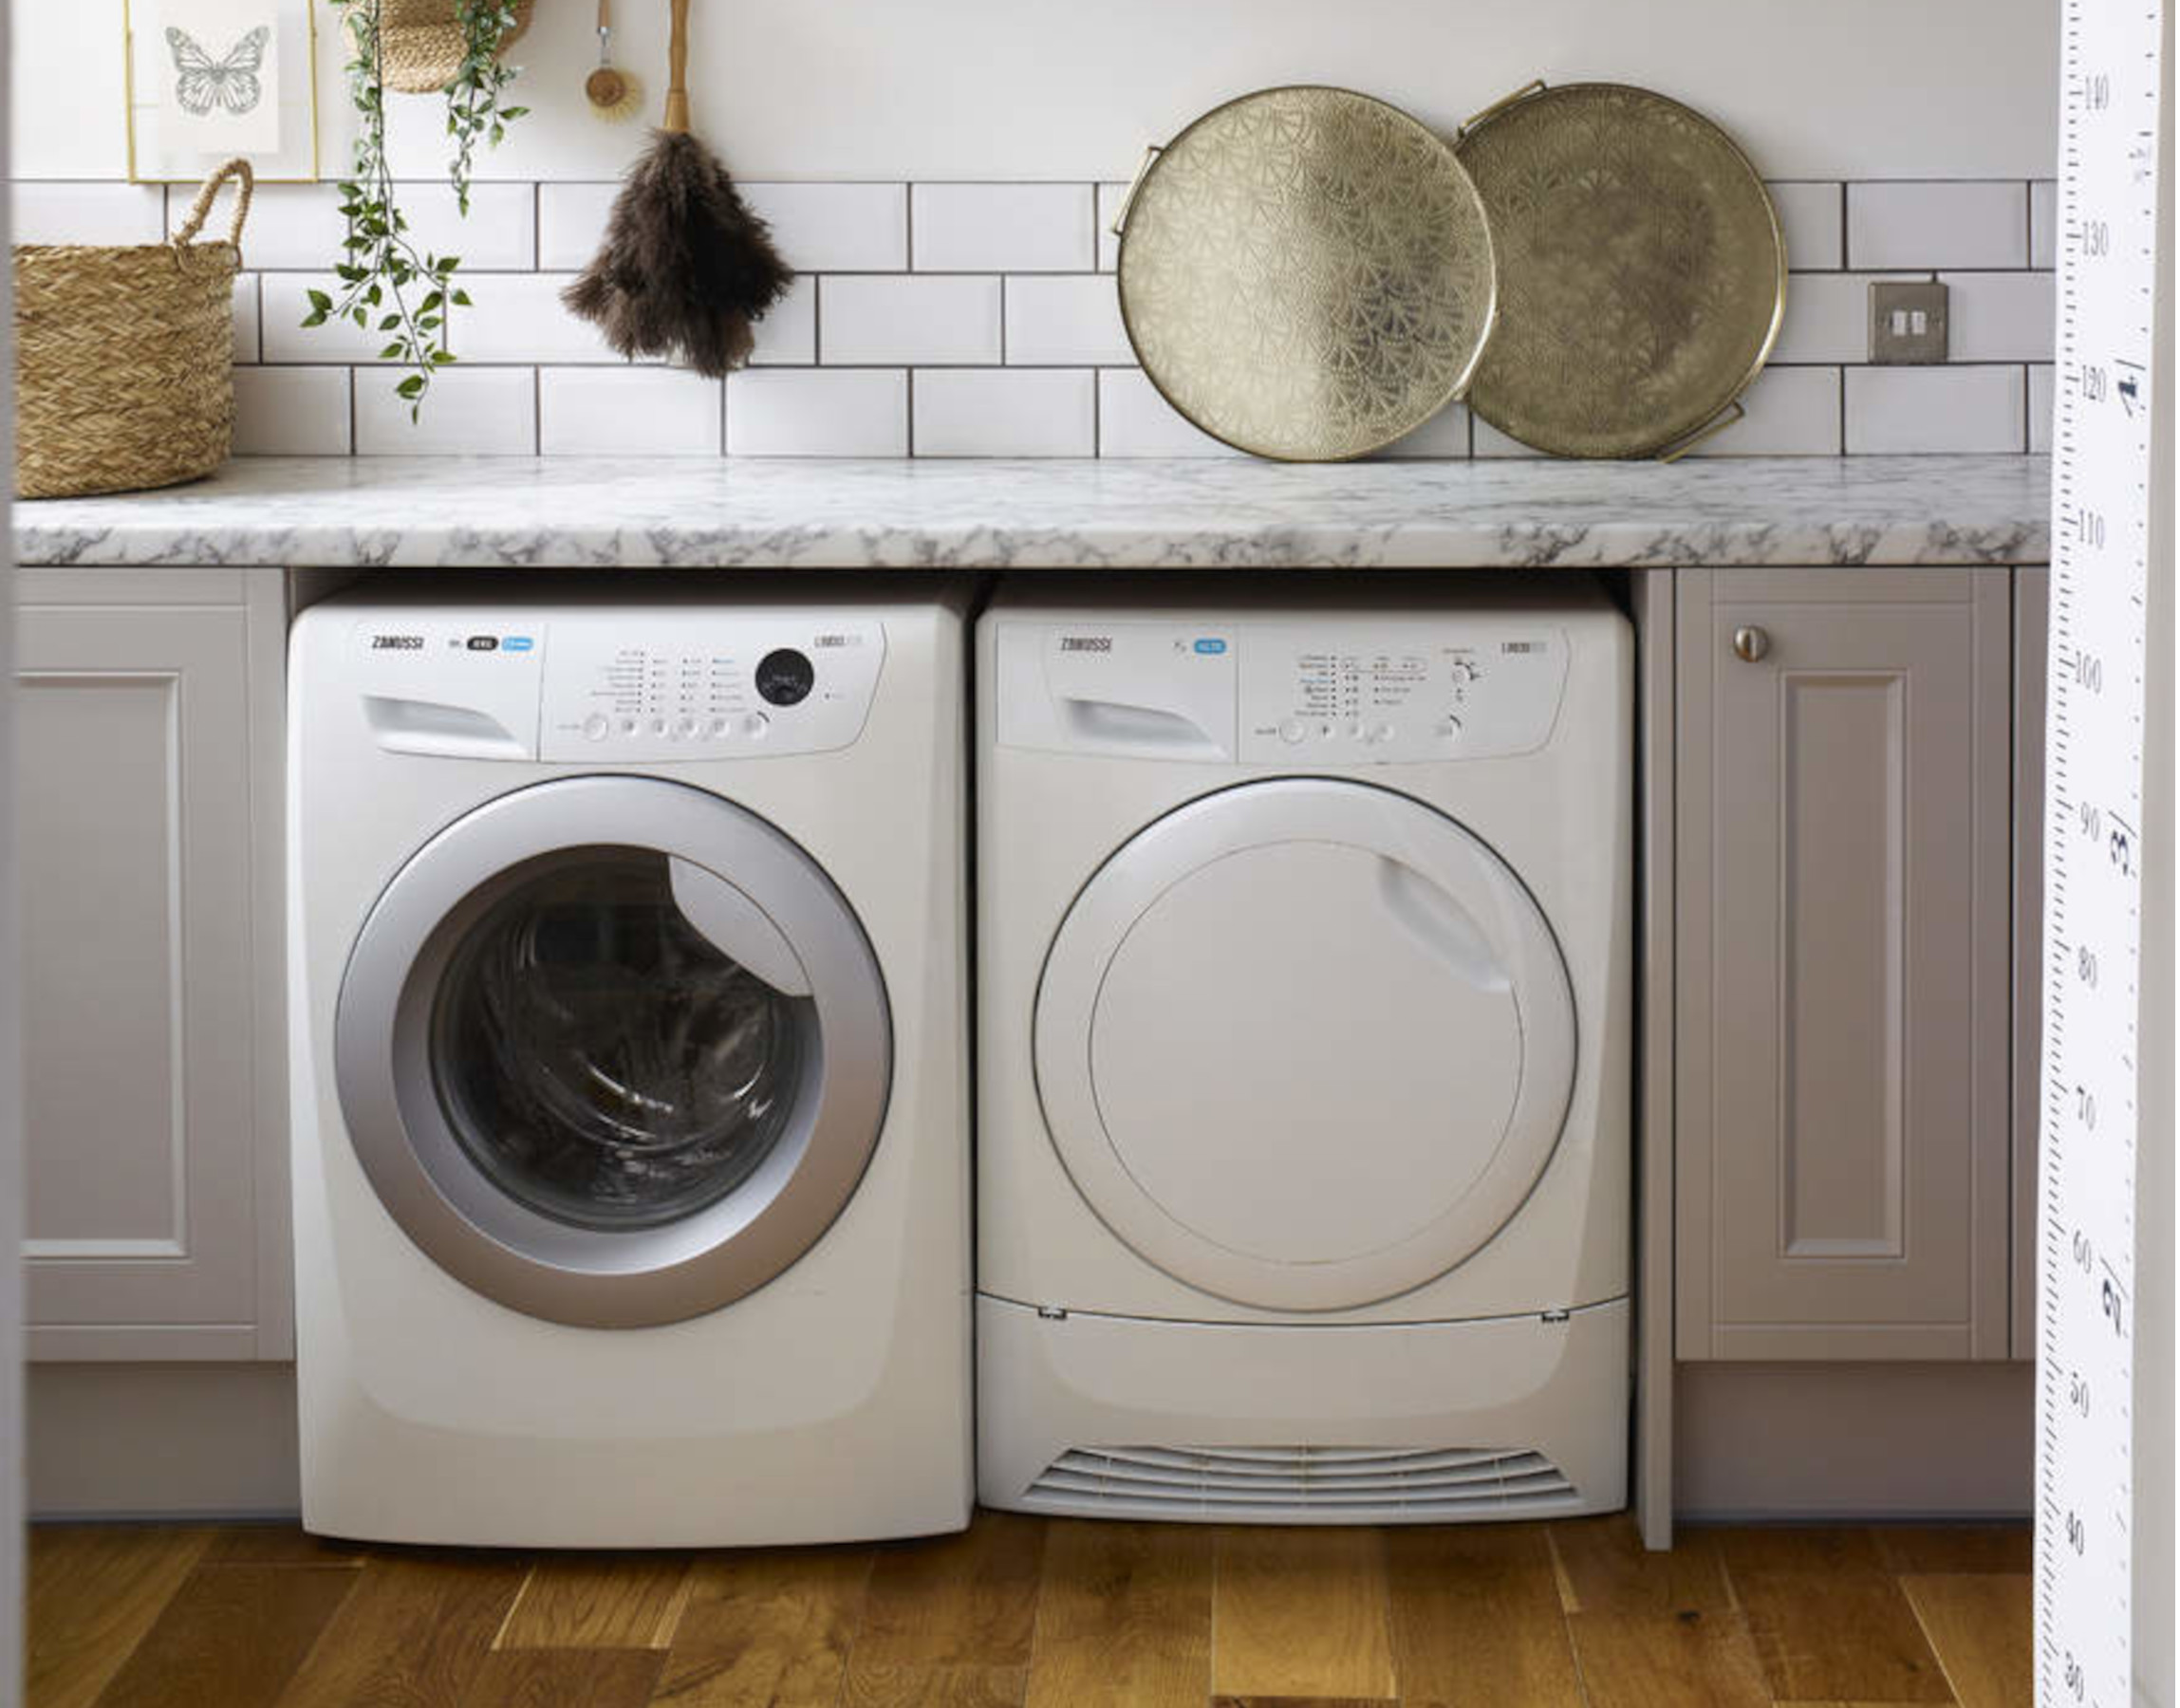 The neglected washing machine mode  that could slash energy usage by 35%